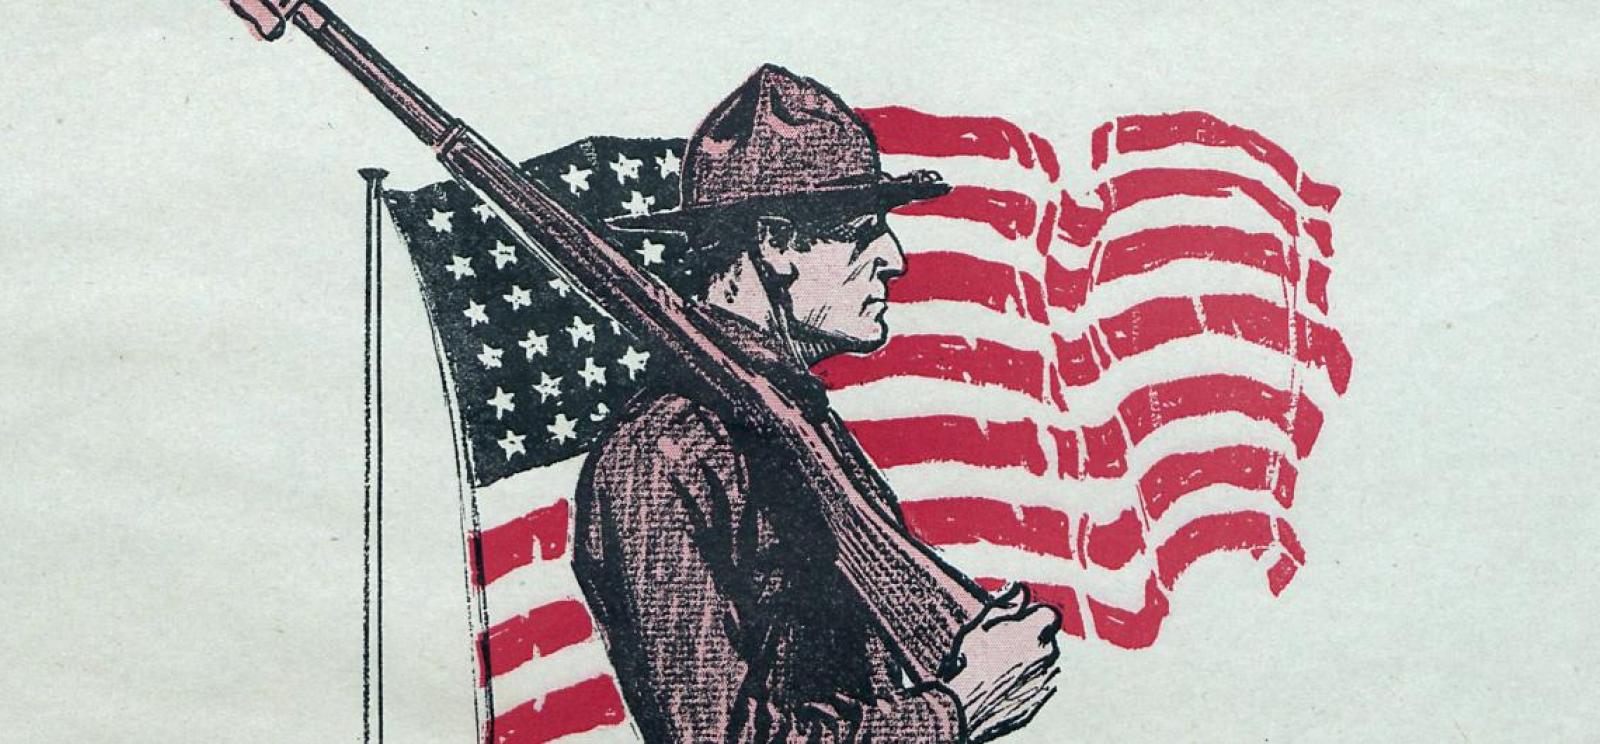 Painting of a soldier on patrol with a rifle. A U.S. flag waves in the background.